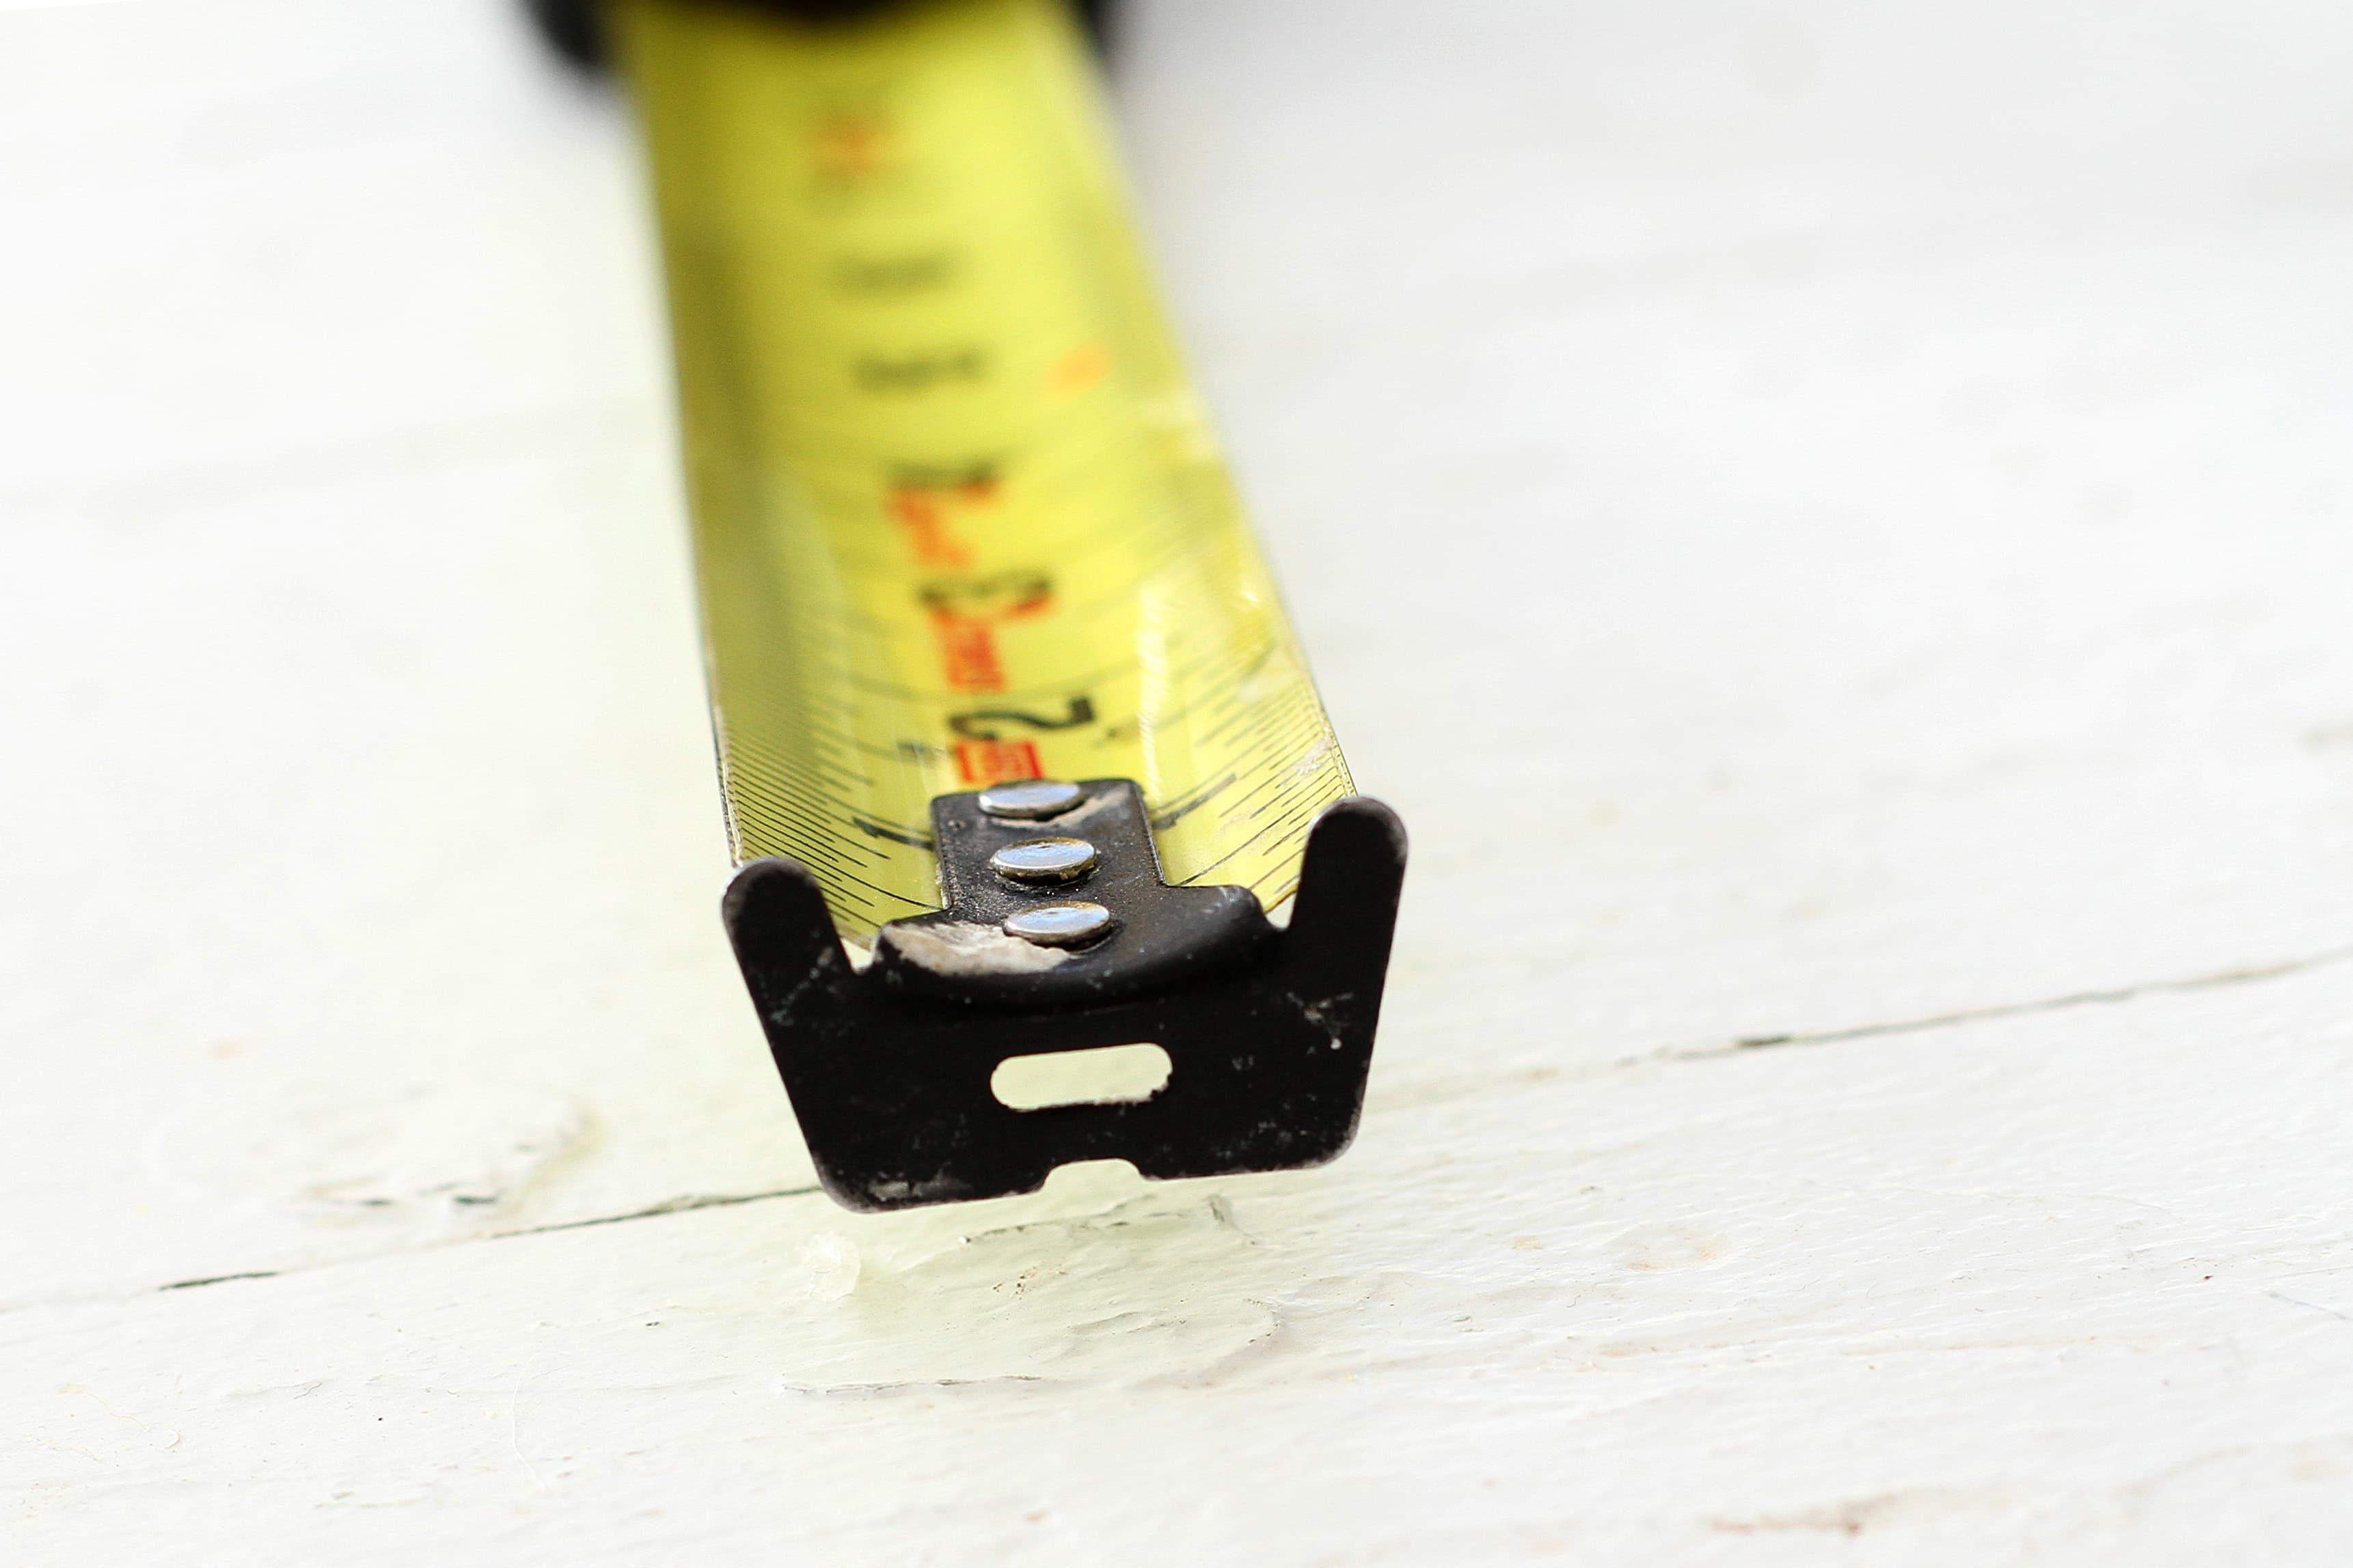 How to Use a Tape Measure Correctly (Tips for Success)